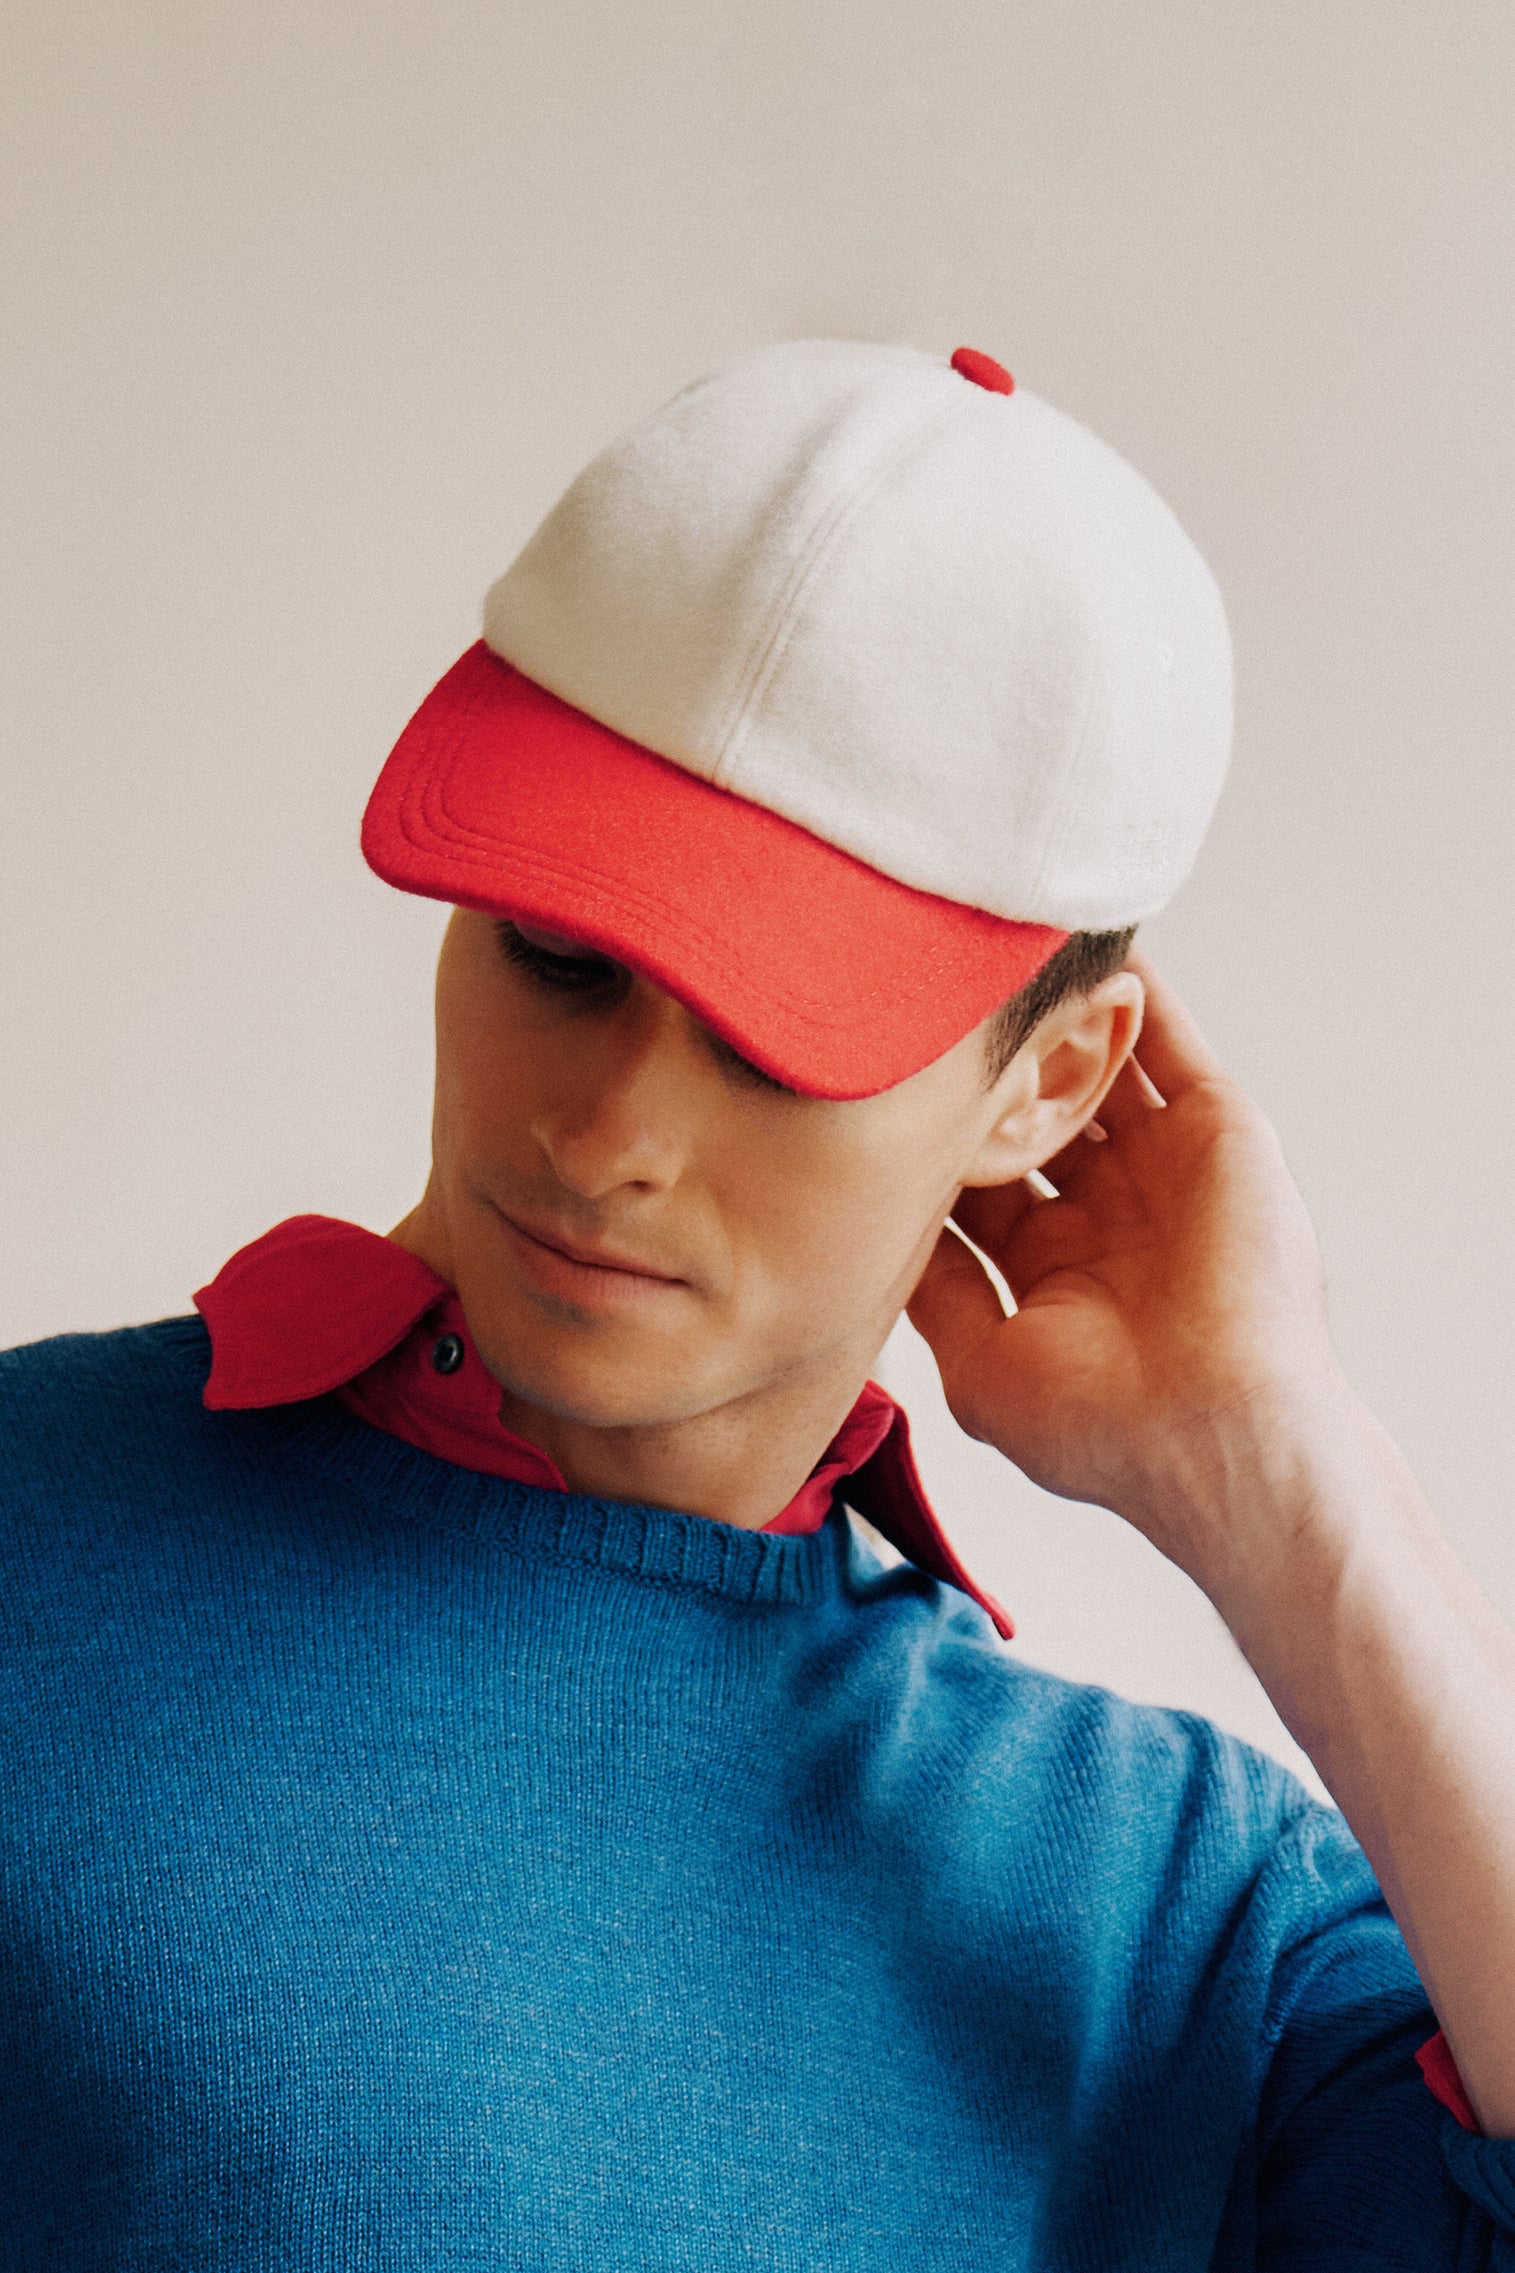 Adjustable Two-Tone Cashmere Baseball Cap - Hats for Tall People - Lock & Co. Hatters London UK